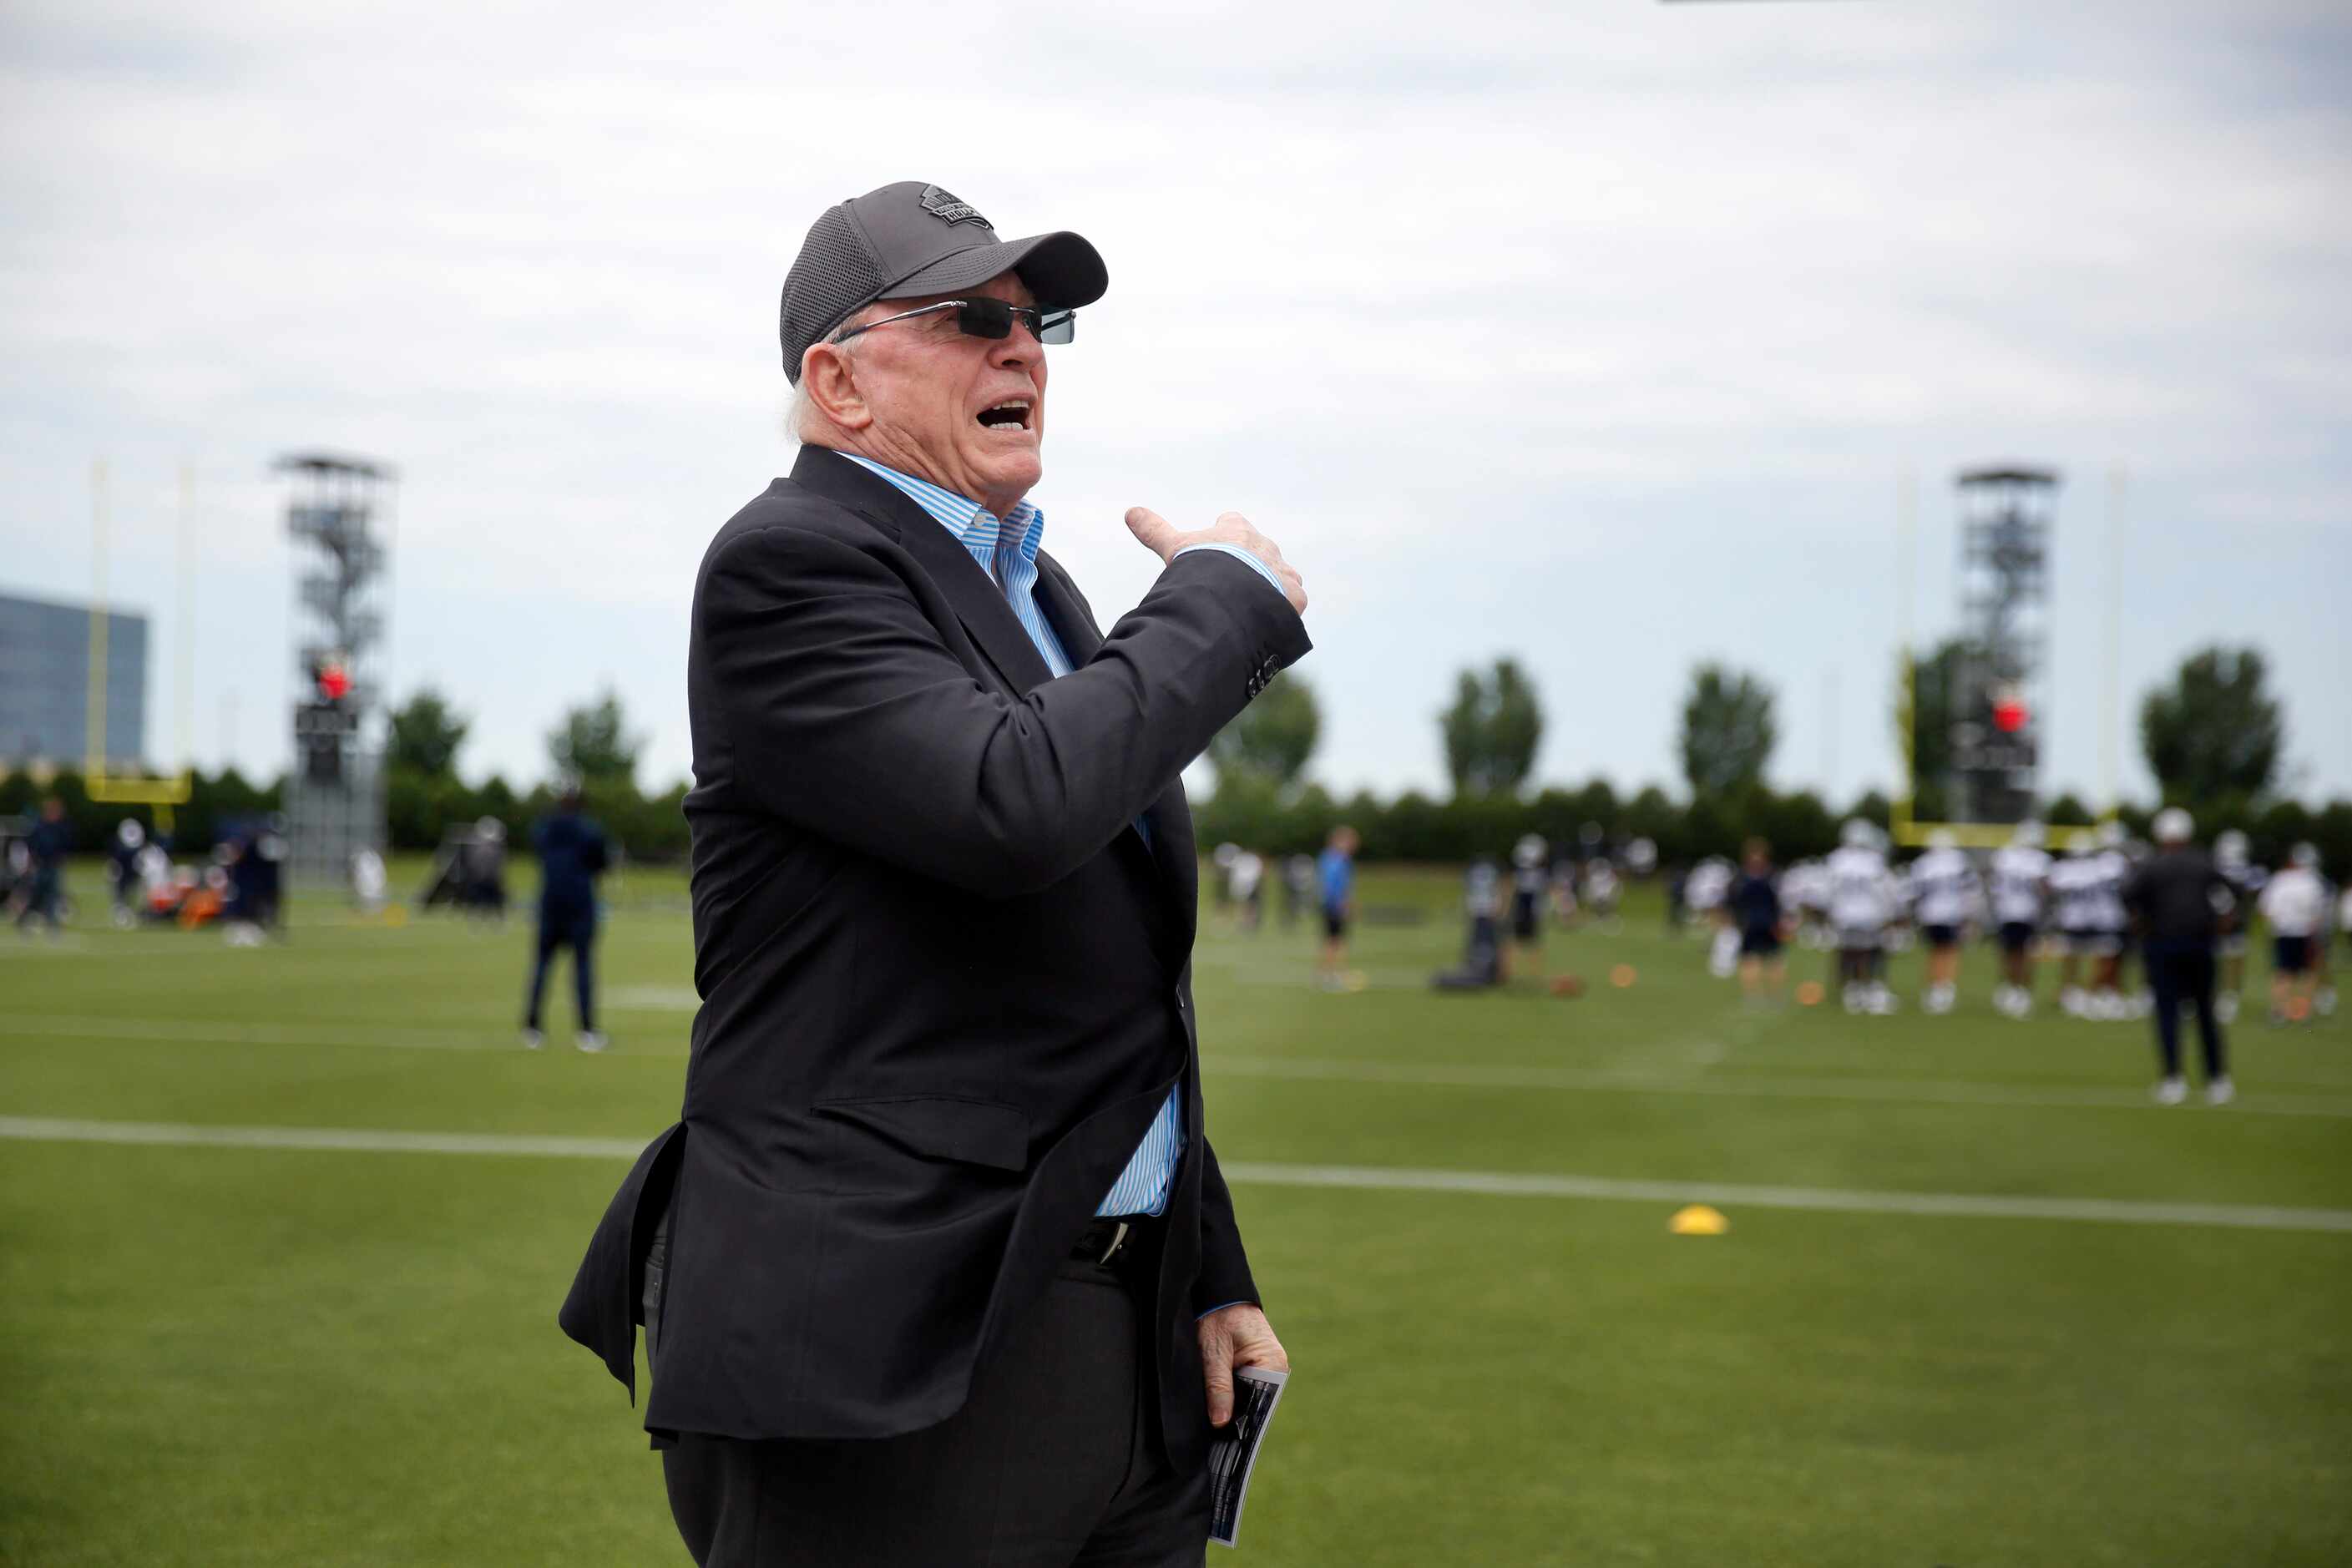 Before rookie minicamp began, Dallas Cowboys owner Jerry Jones came over to update the media...